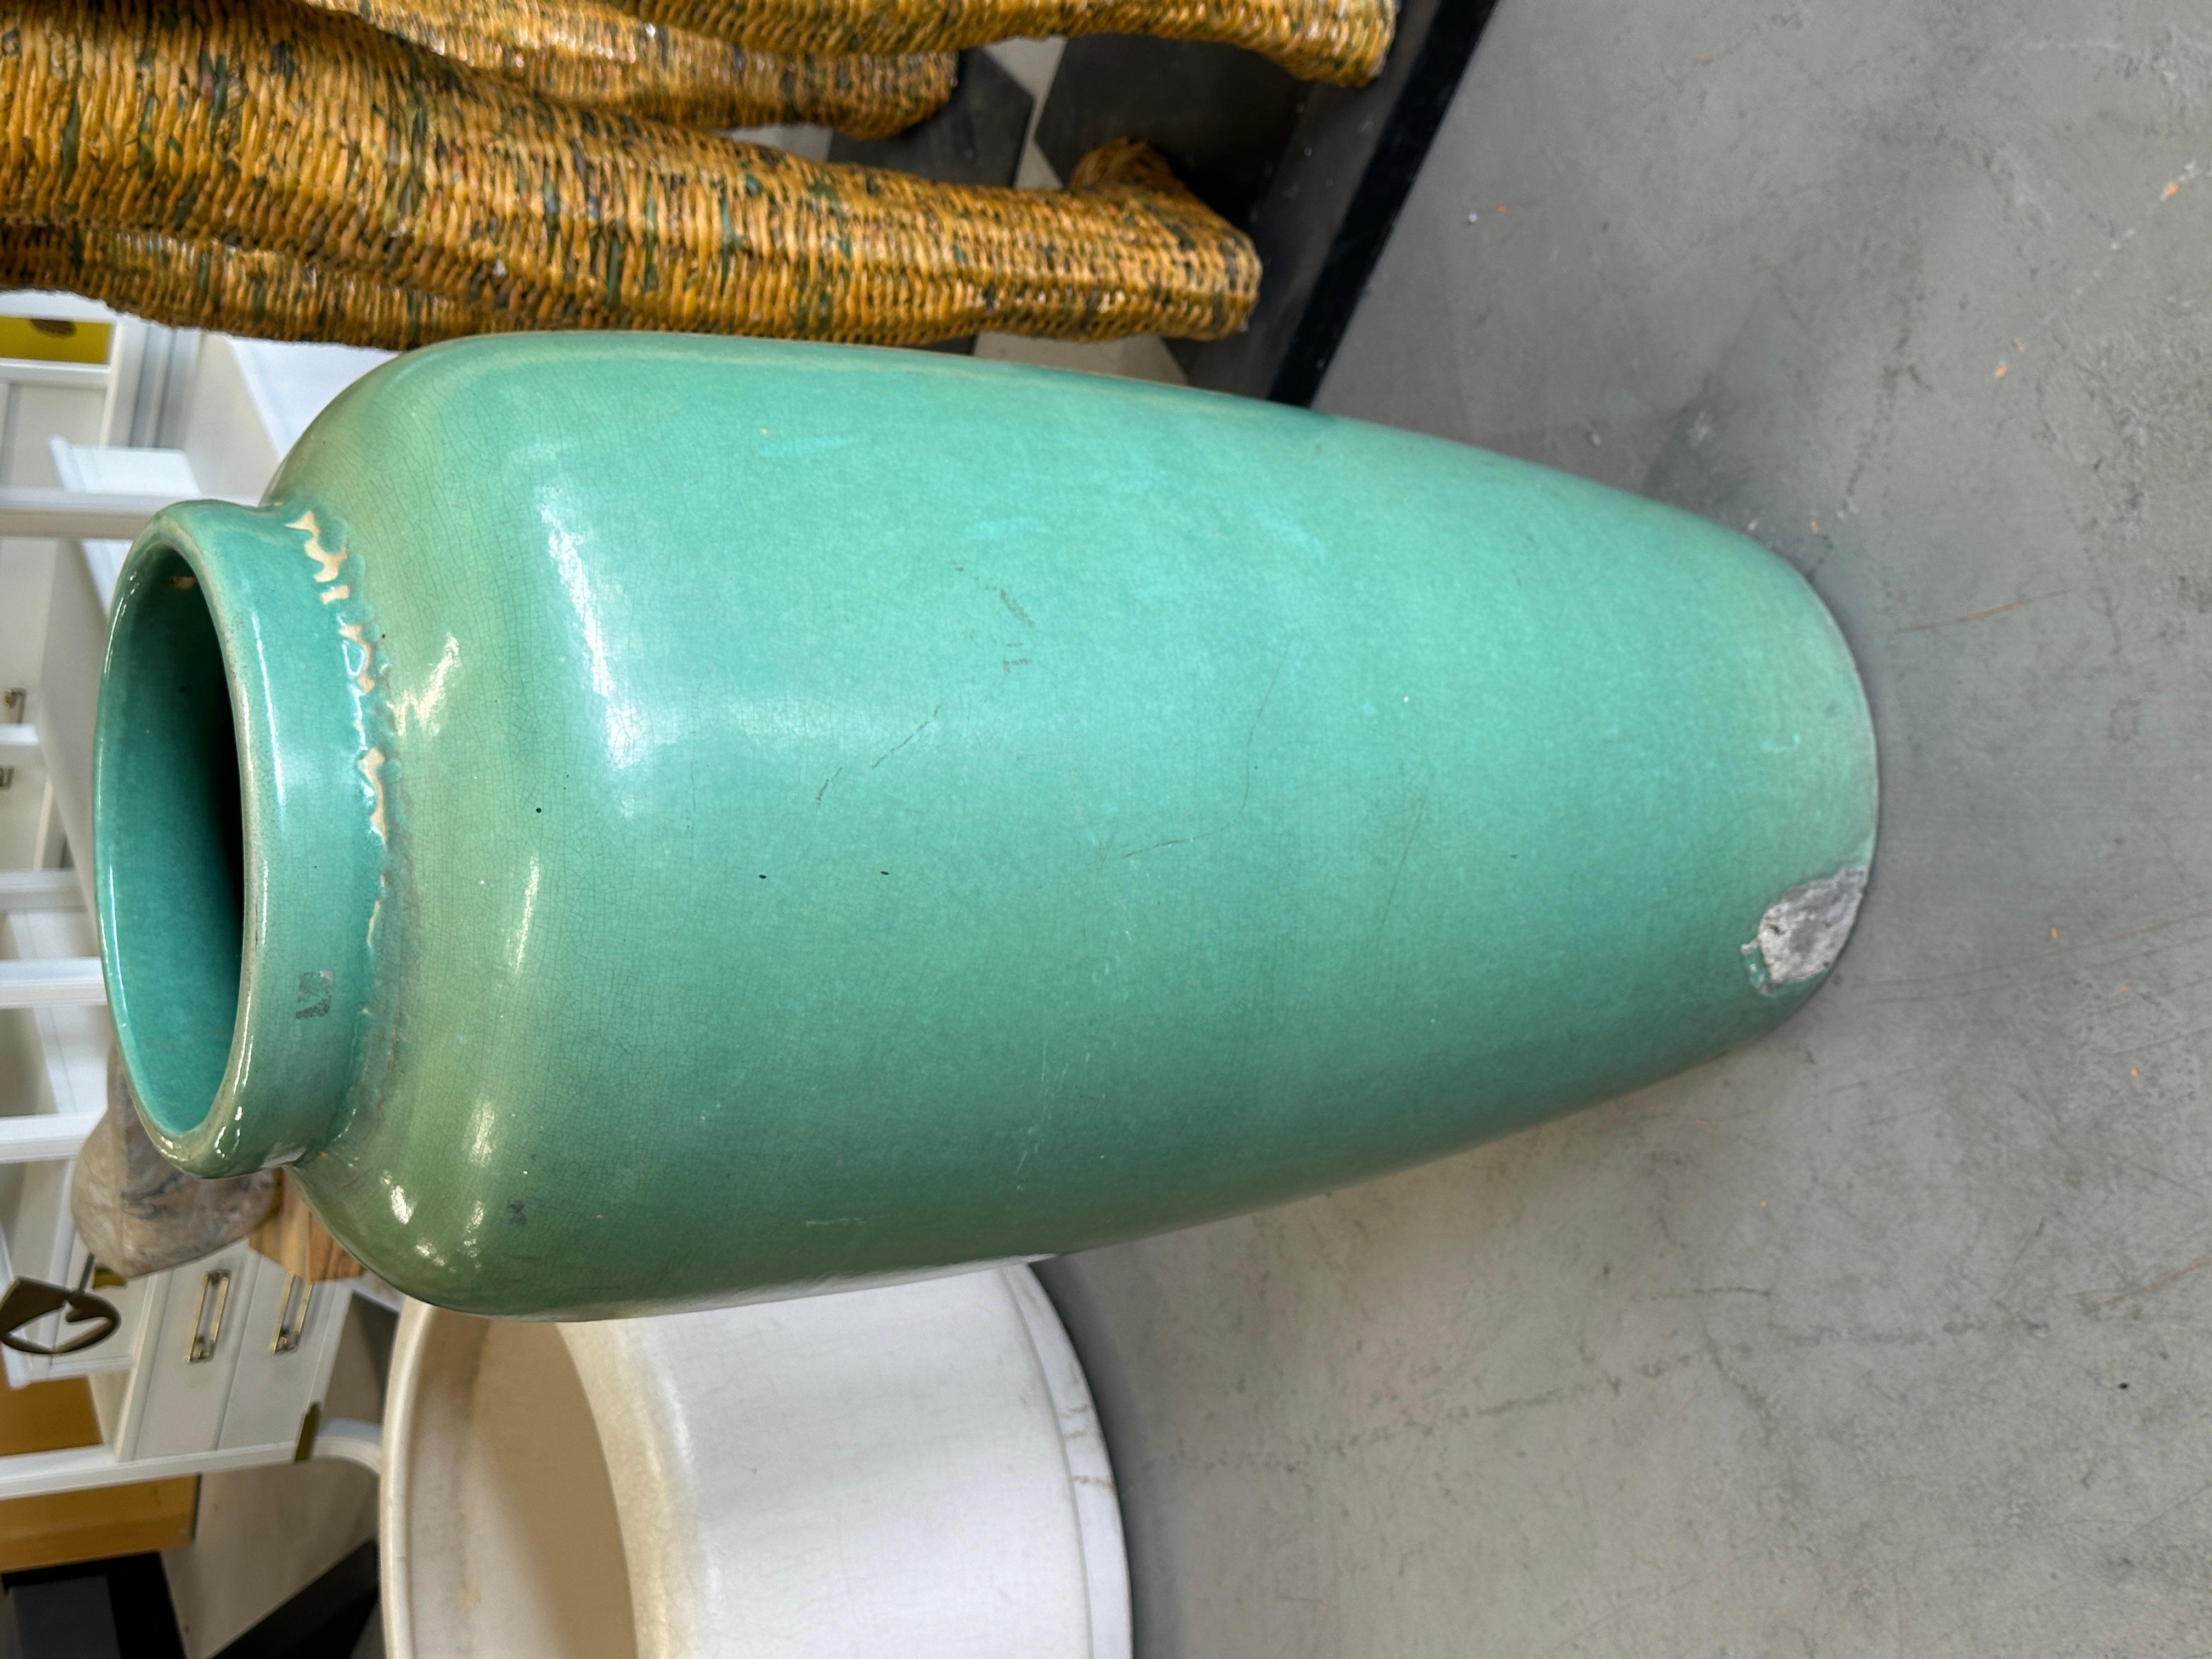 A monumental Oil Jar or large floor vase in a green glaze. It was purchased out of the estate of a long time antique dealer's home. He collected Catalina pottery but this is more reminiscent of Bauer or Ohio Potteries like Roseville or RRP,